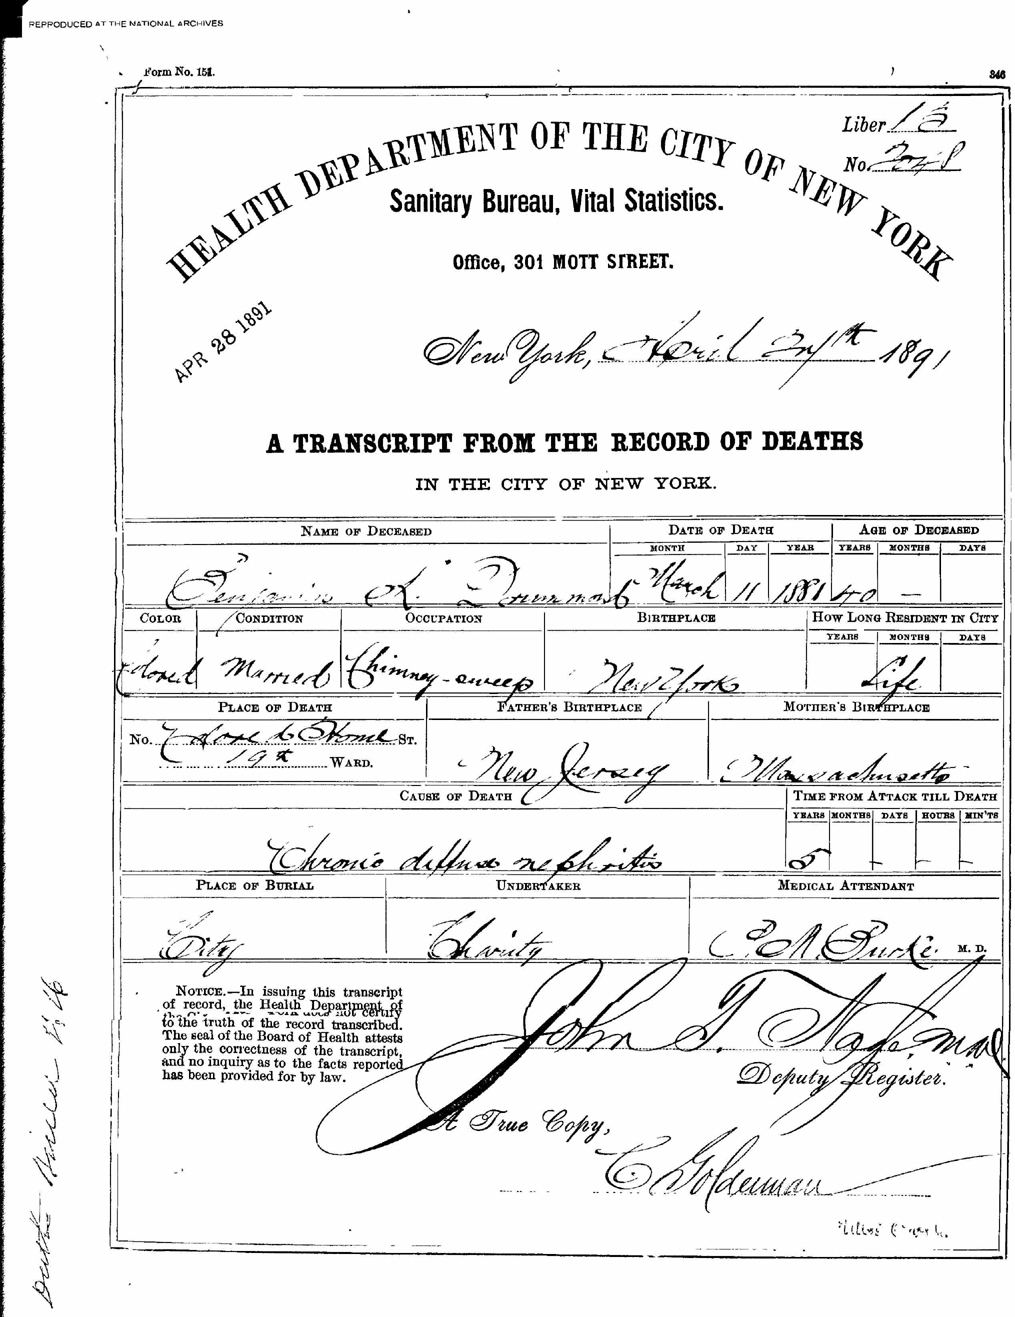 The Death Certificate for Benjamin Drummond, the first patient admitted into the Naval Hospital, Washington City, when it opened on October 1, 1866.